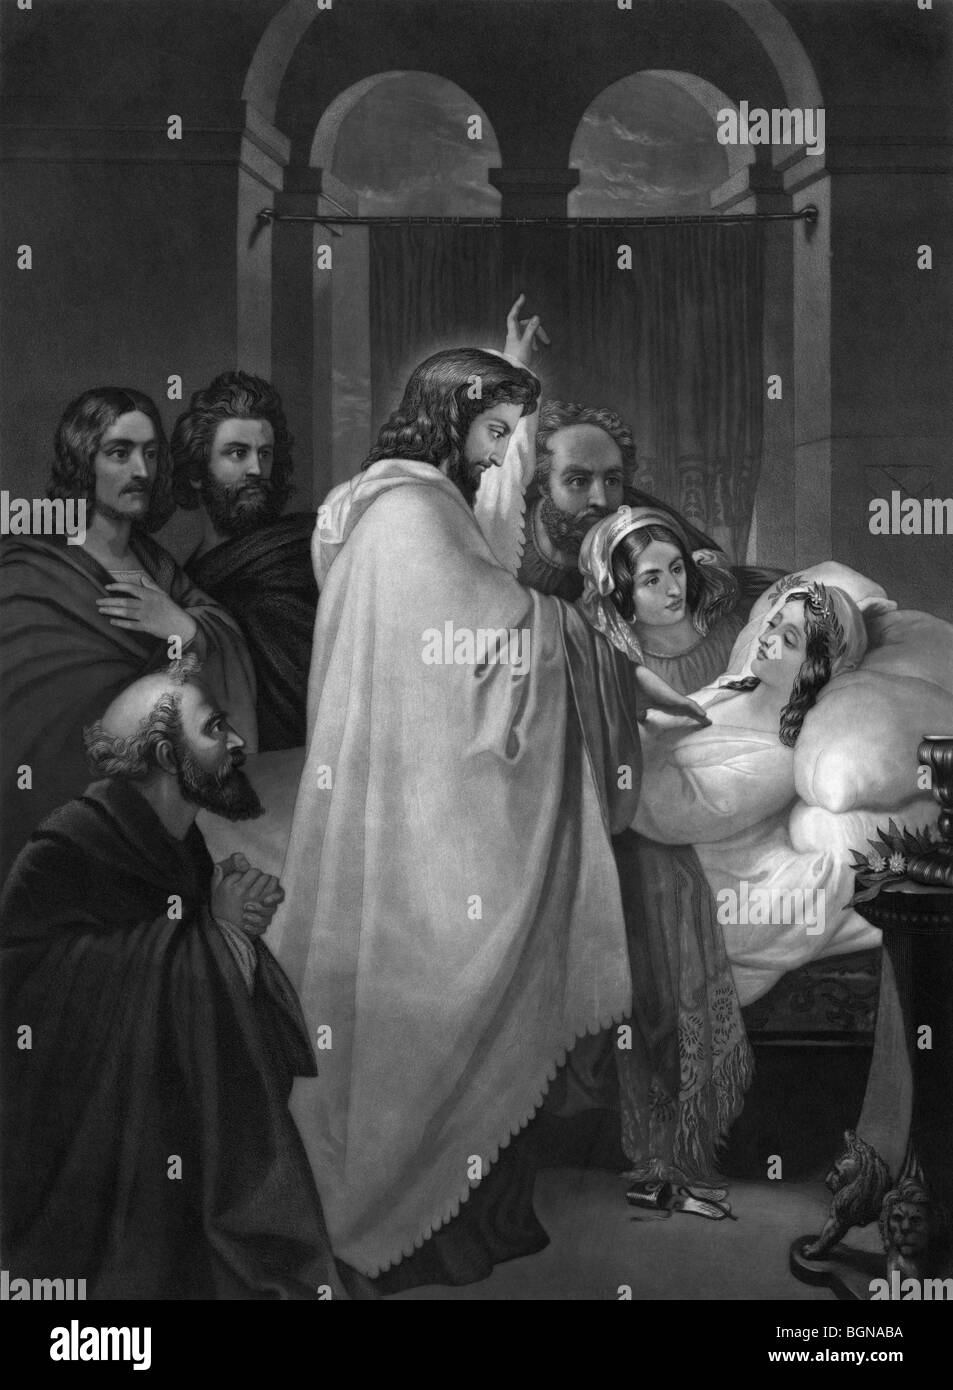 Print engraving circa 1866 depicting Jesus Christ raising the daughter of Jairus from the dead. Stock Photo